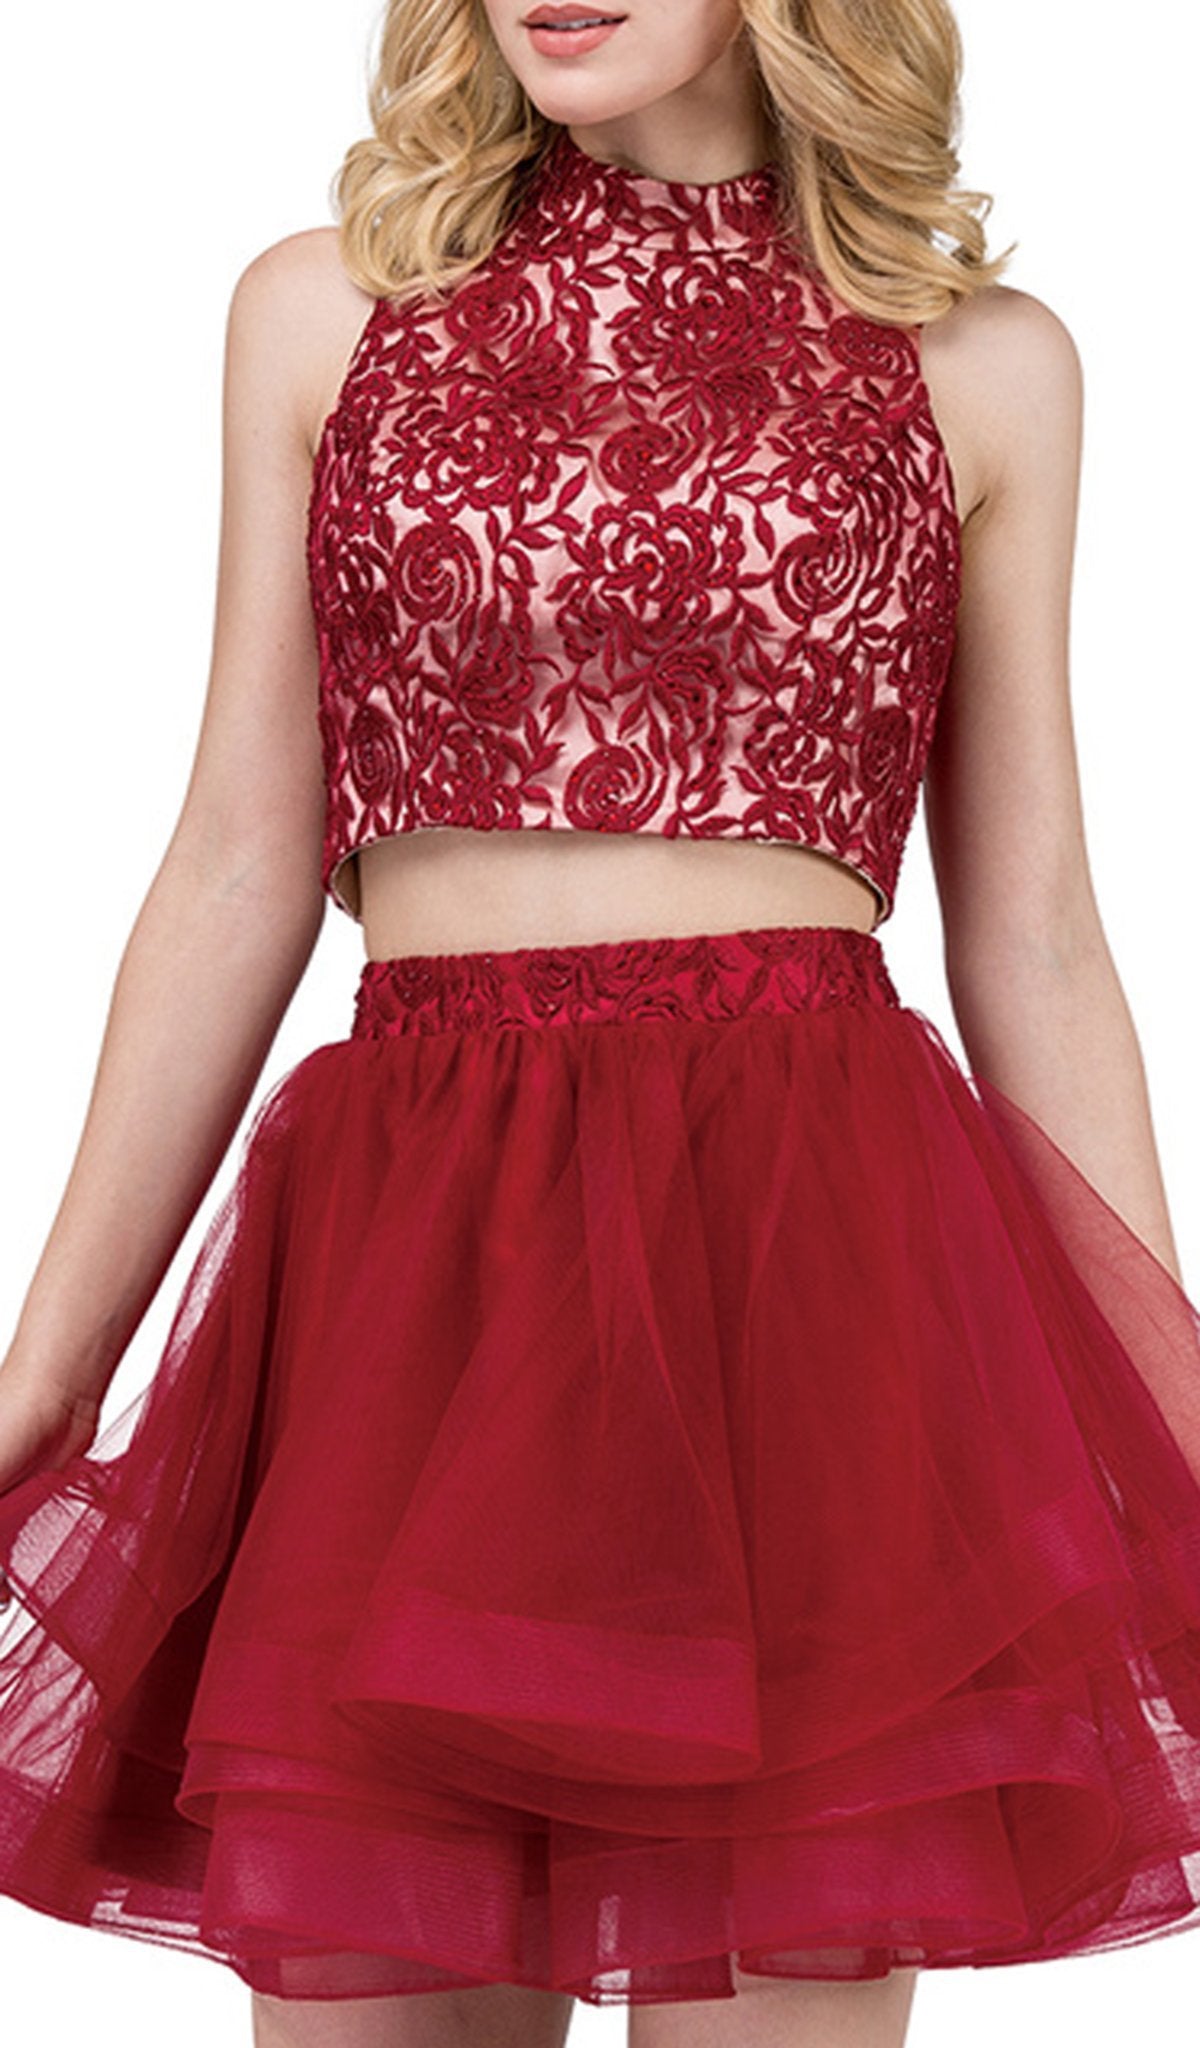 Dancing Queen - 3042 Two Piece Floral Embroidered Homecoming Dress in Red